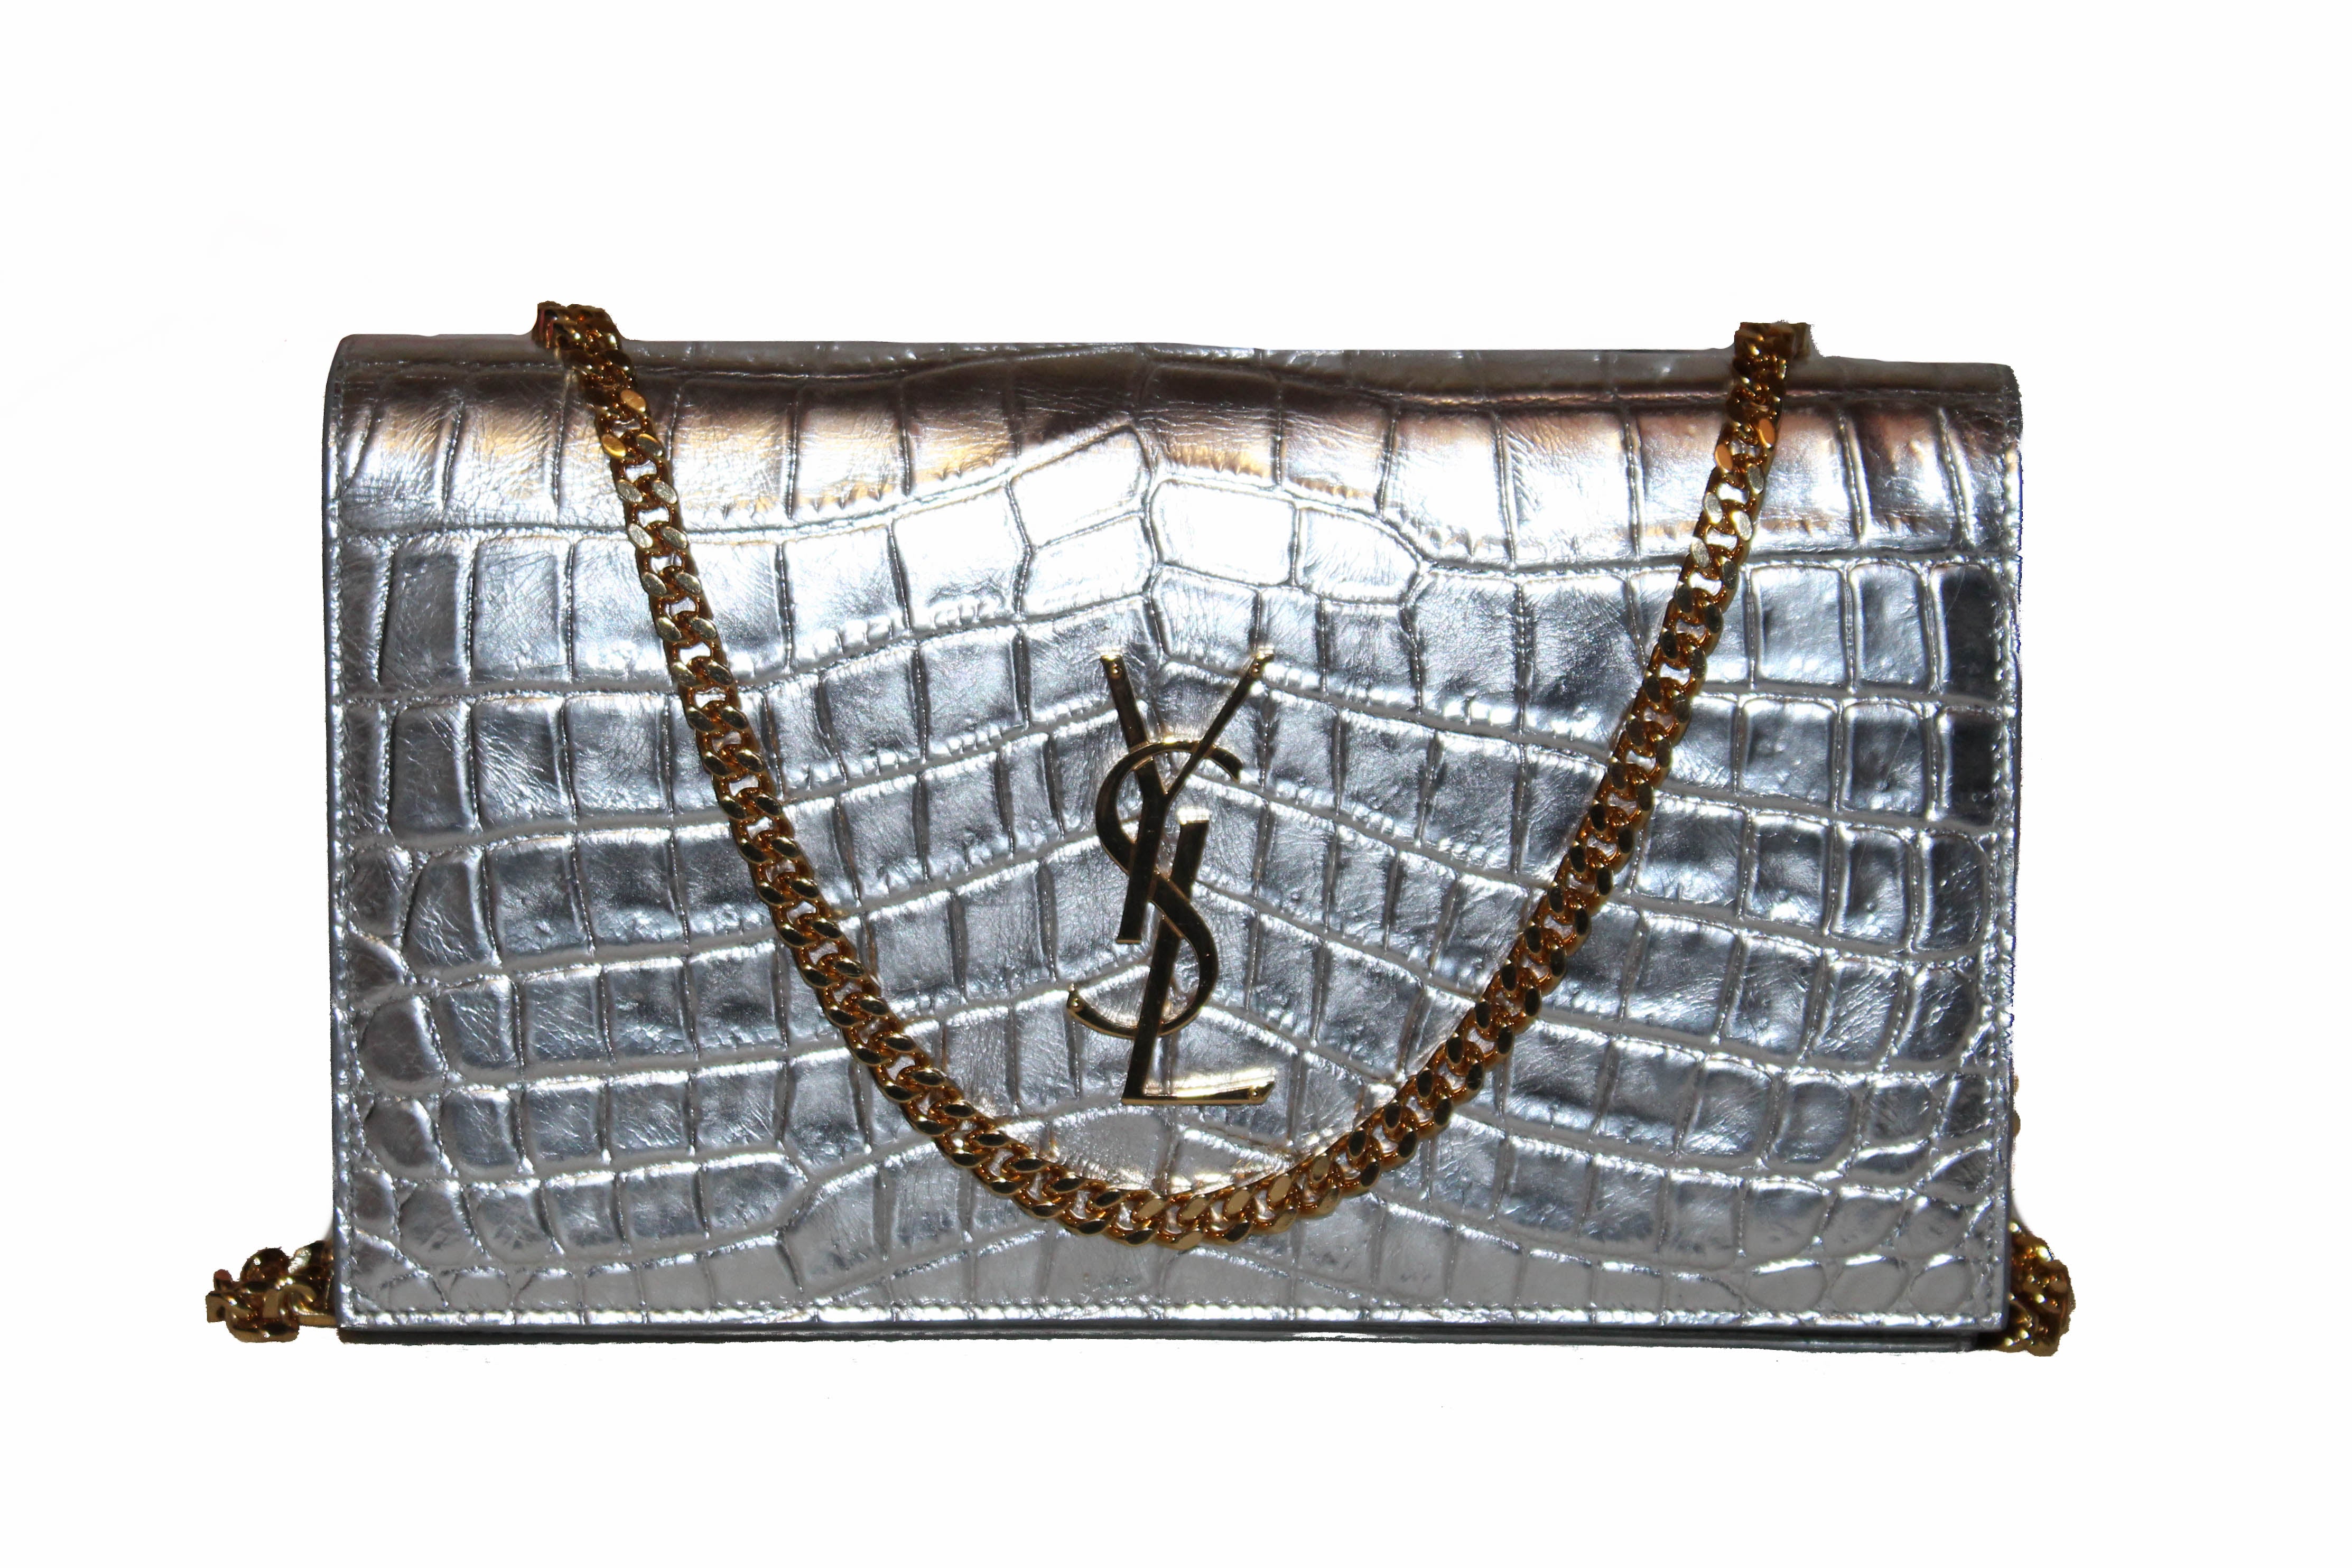 YSL chain purse with authenticity card